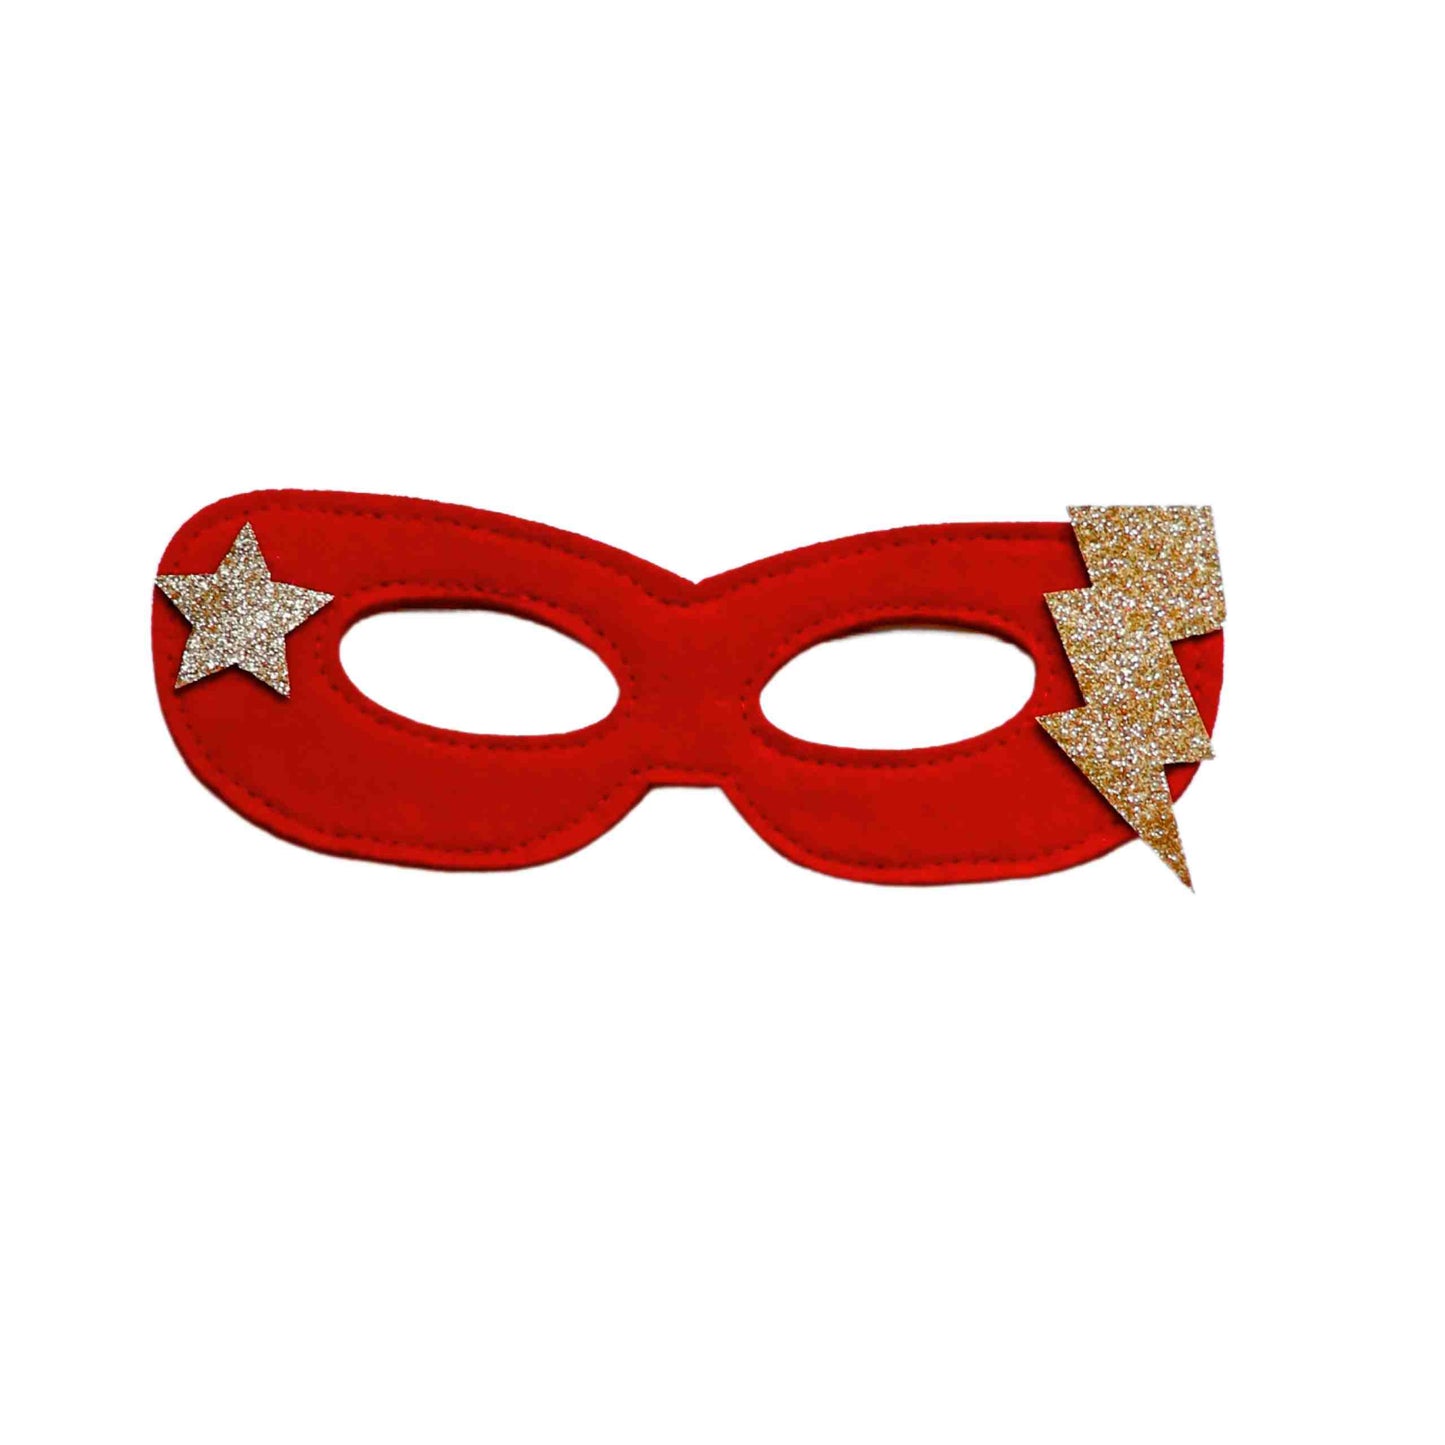 a red mask with gold stars on it